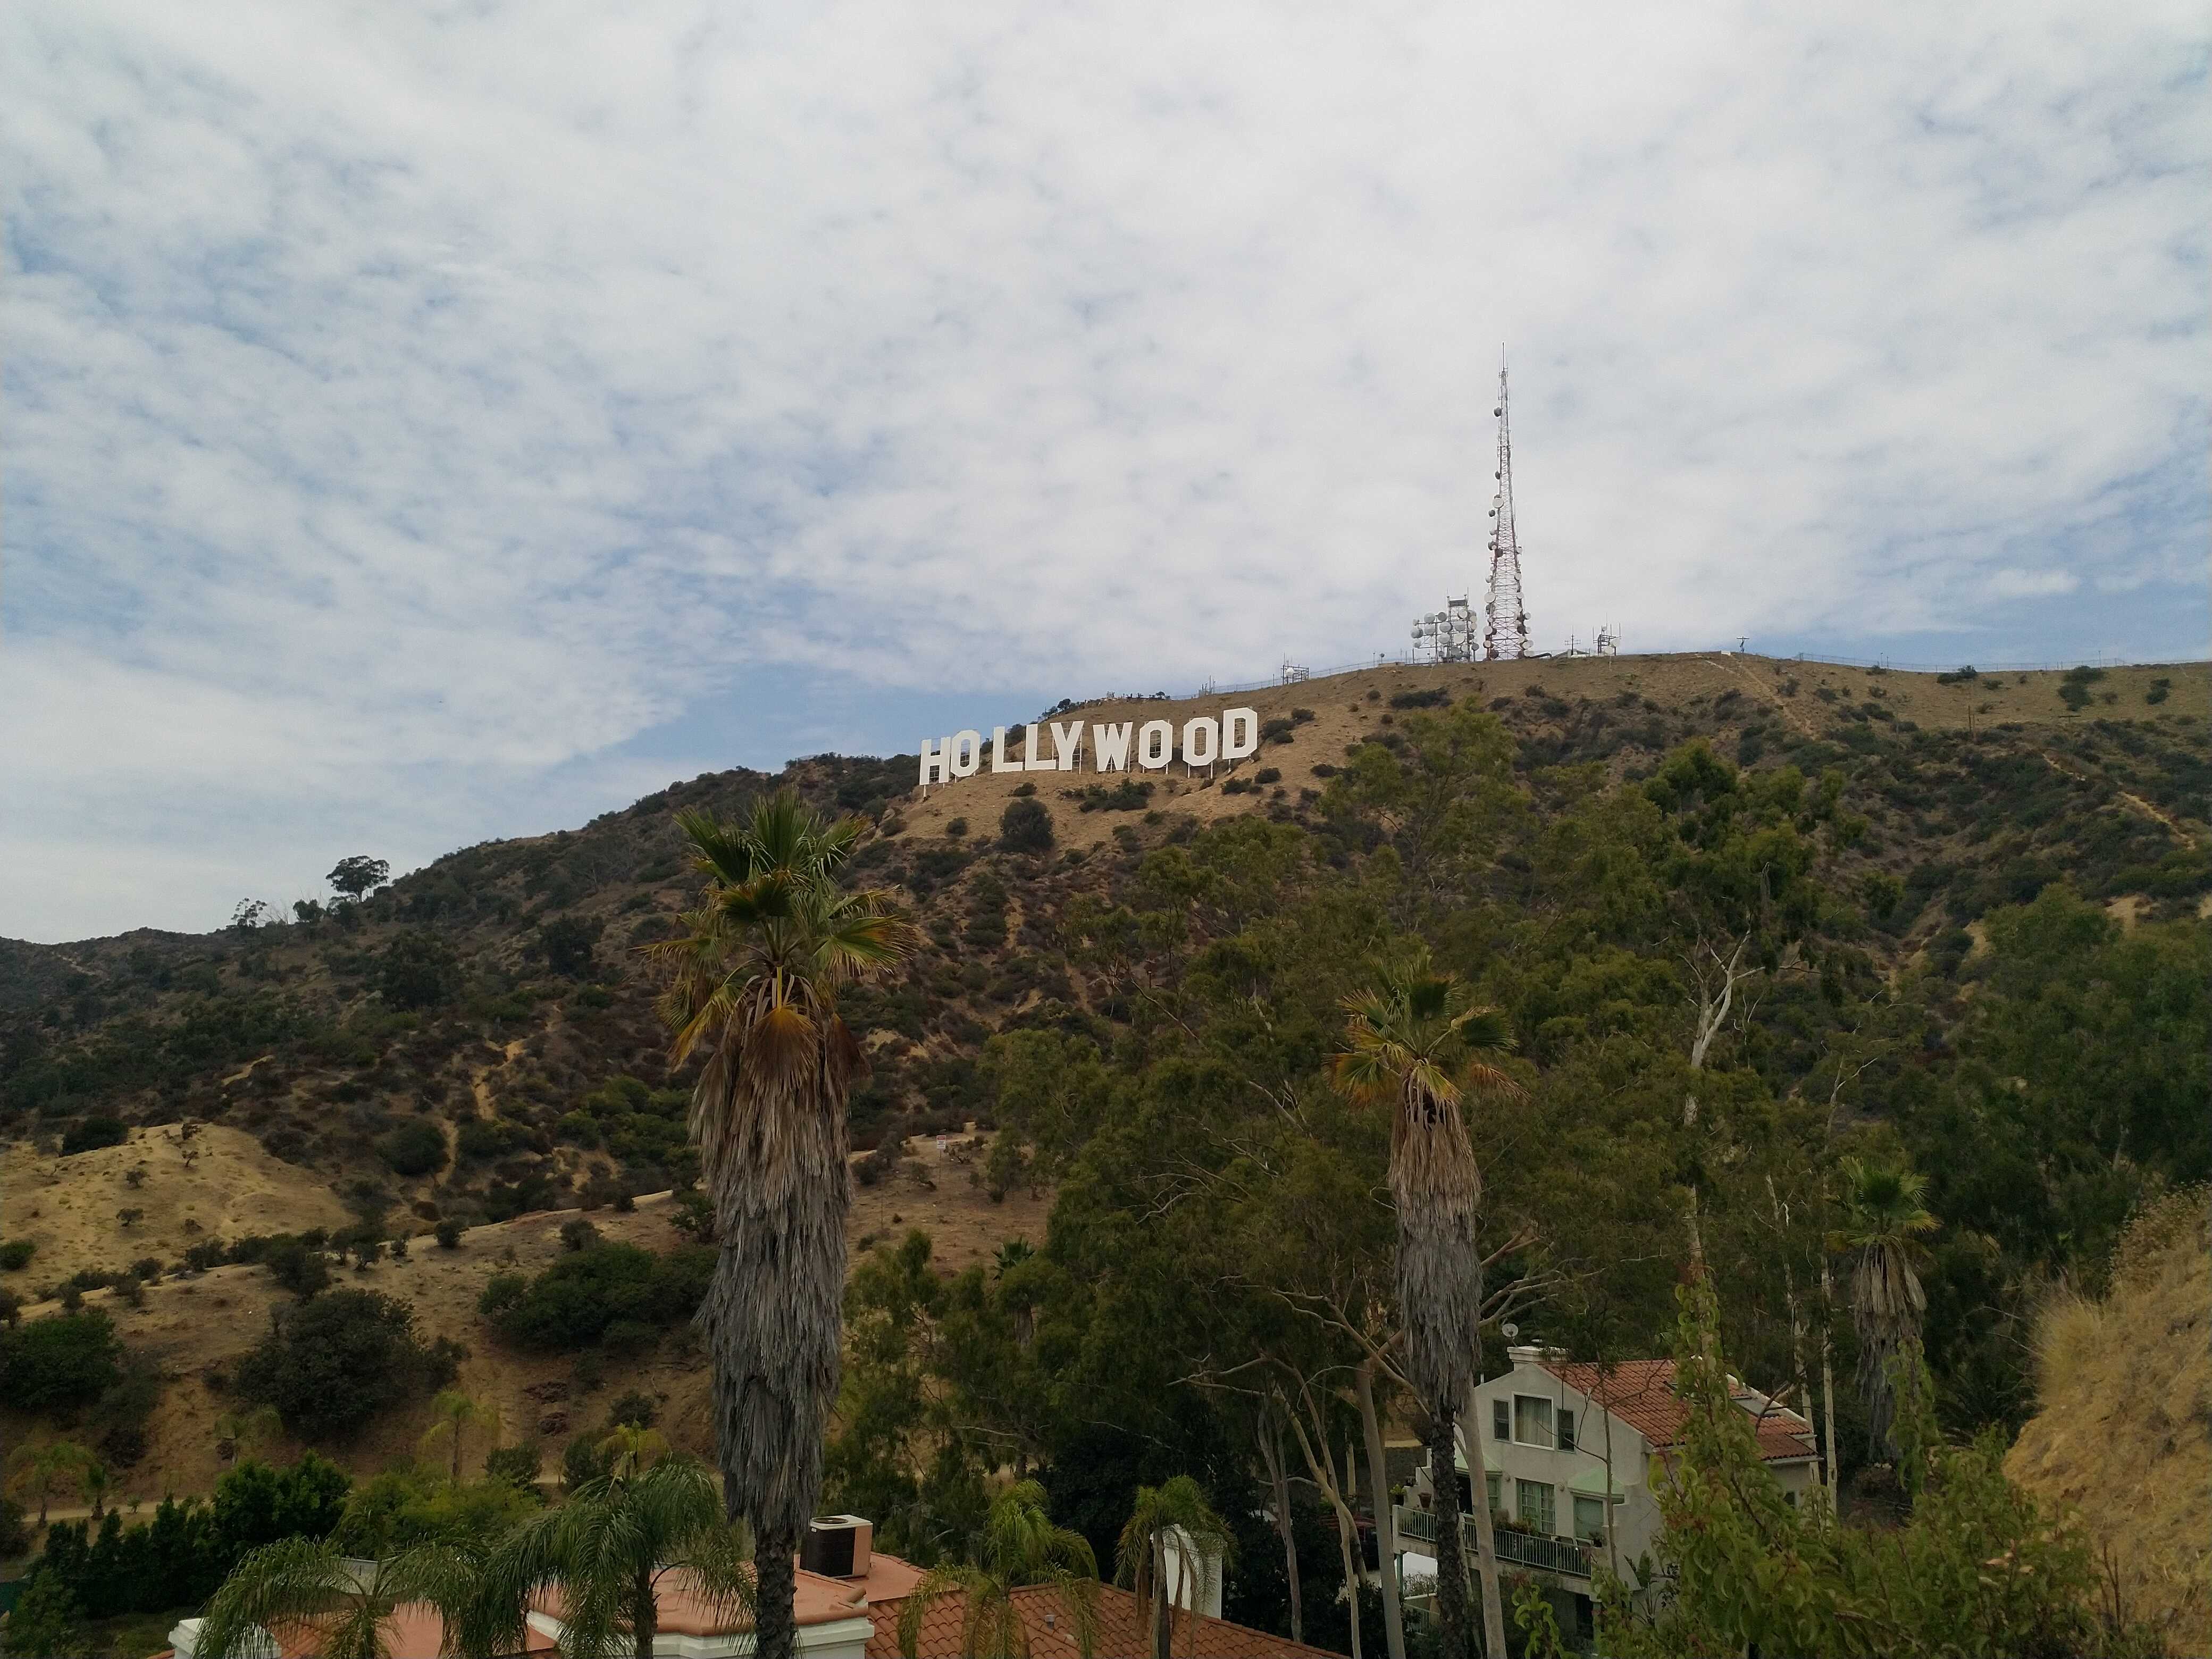 The Hollywood Sign from further away.